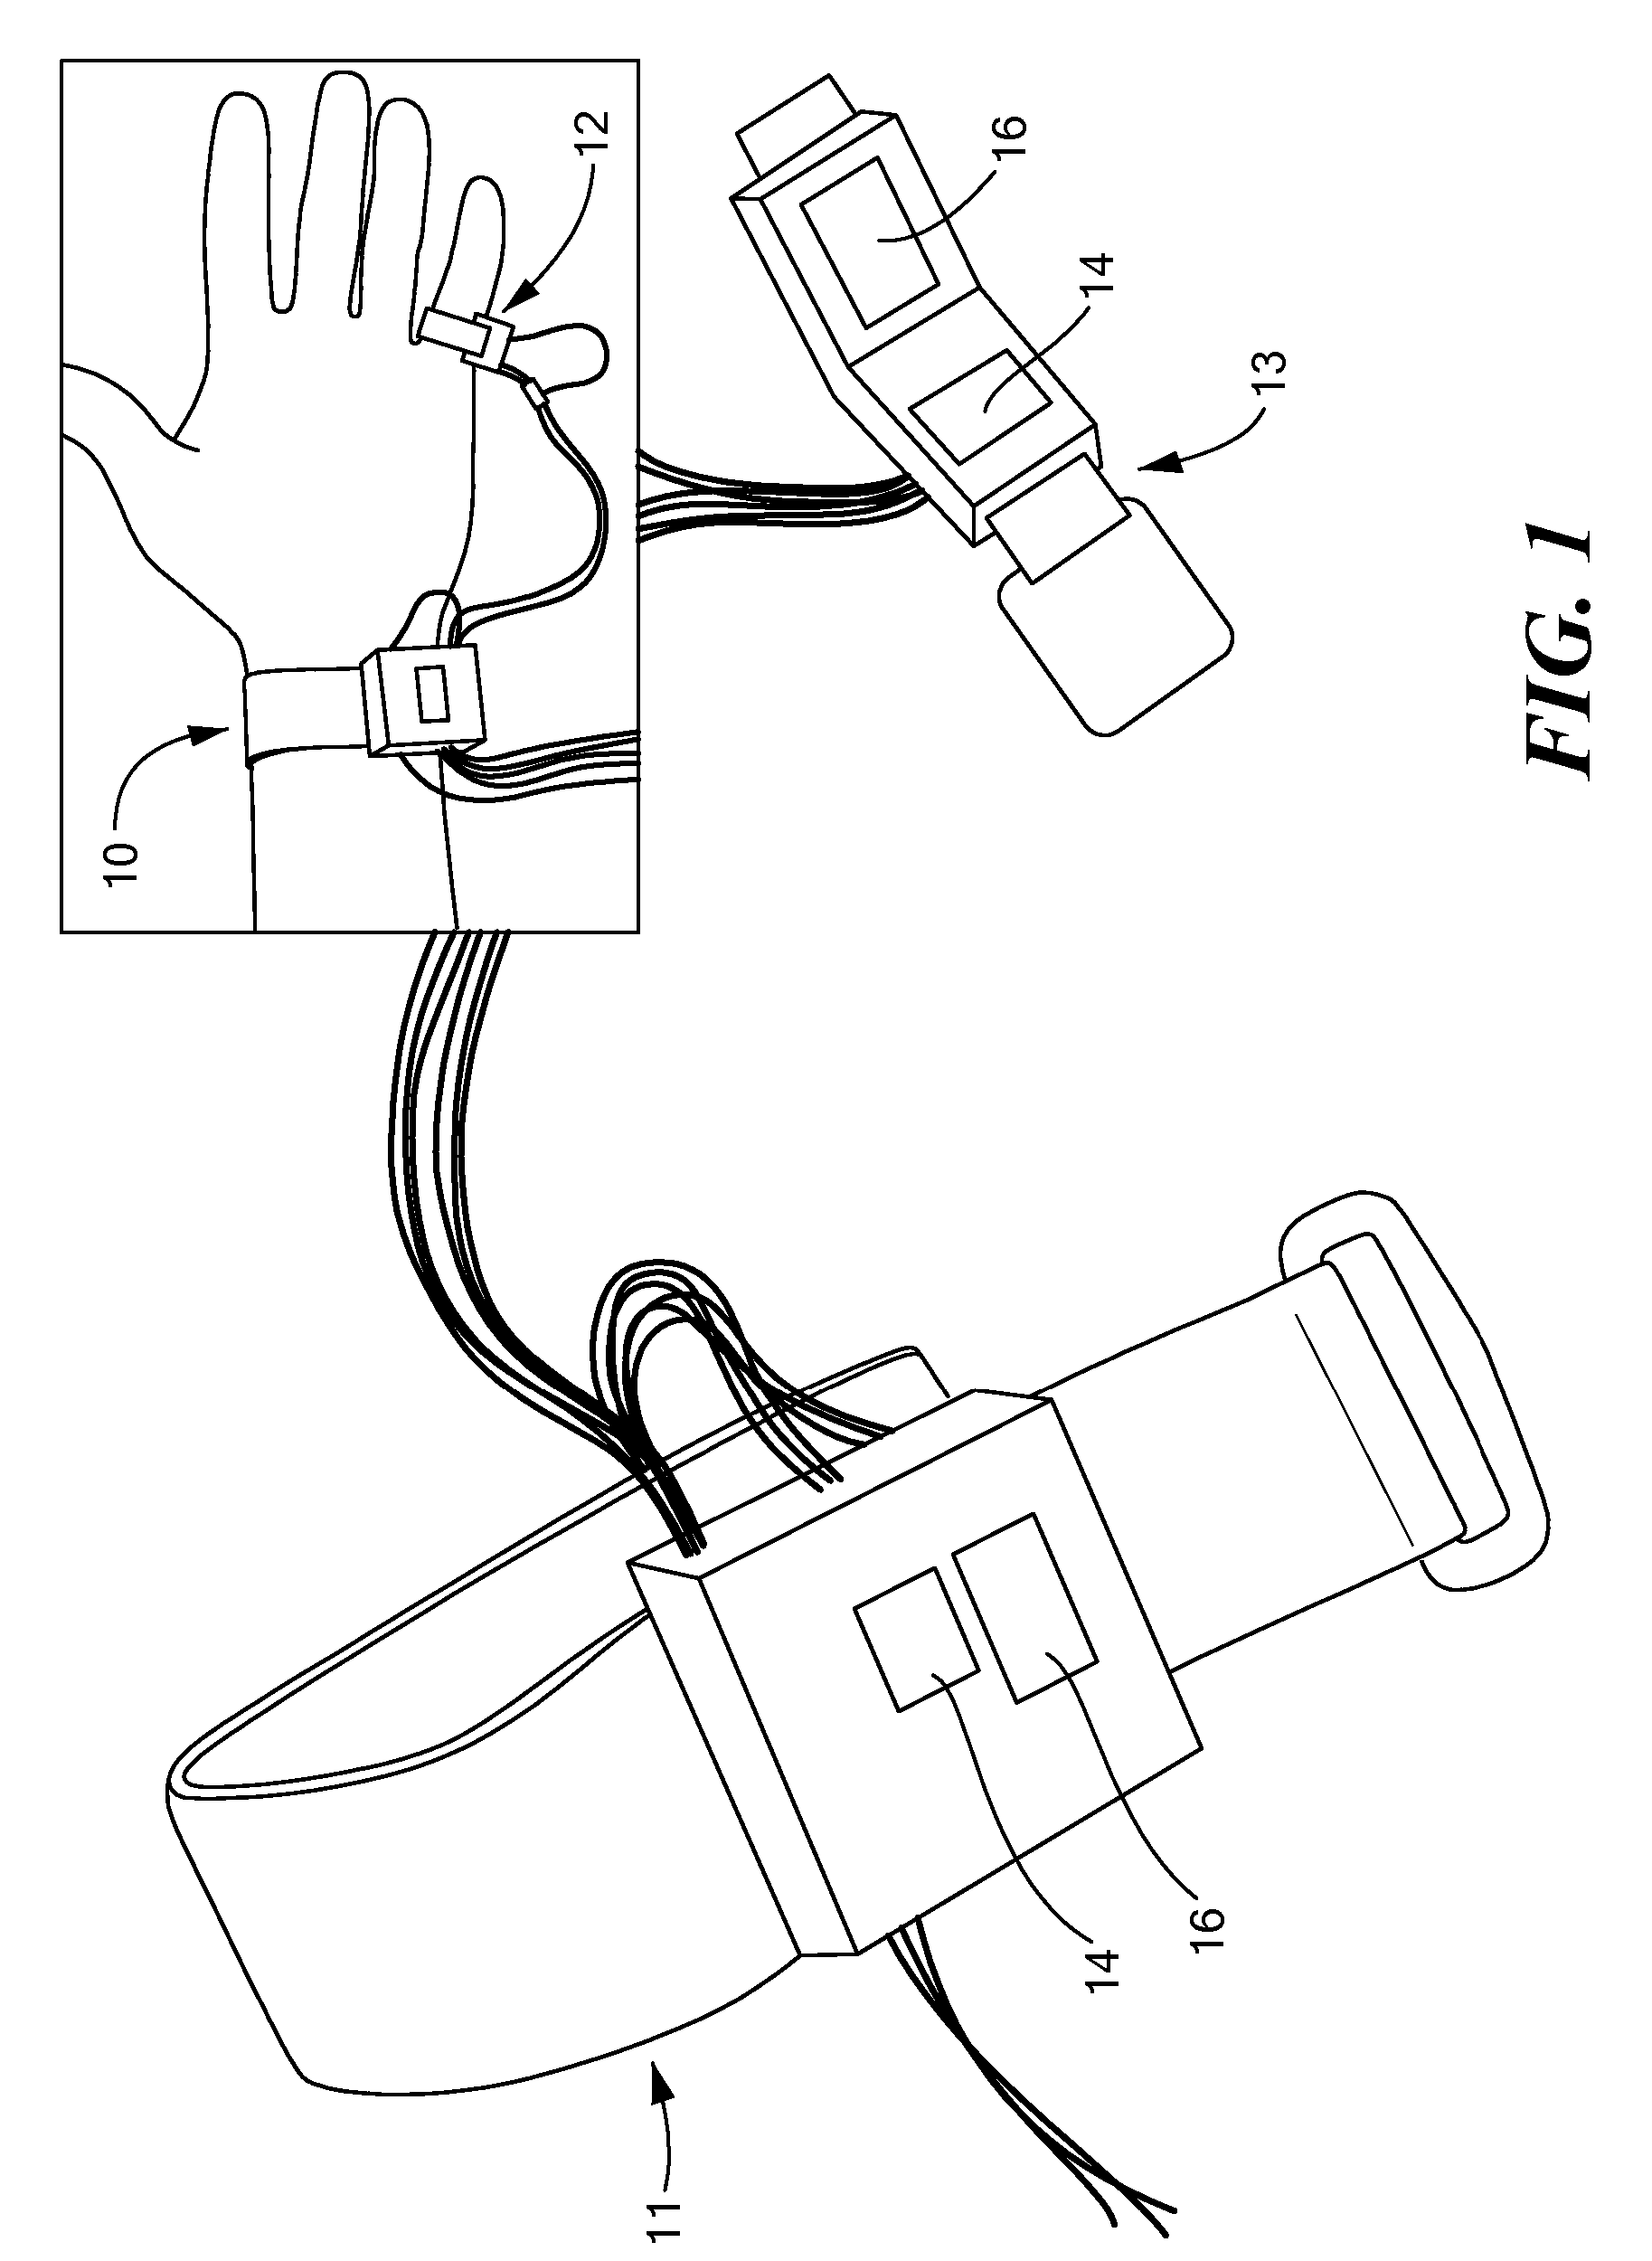 Wearable pulse wave velocity blood pressure sensor and methods of calibration thereof